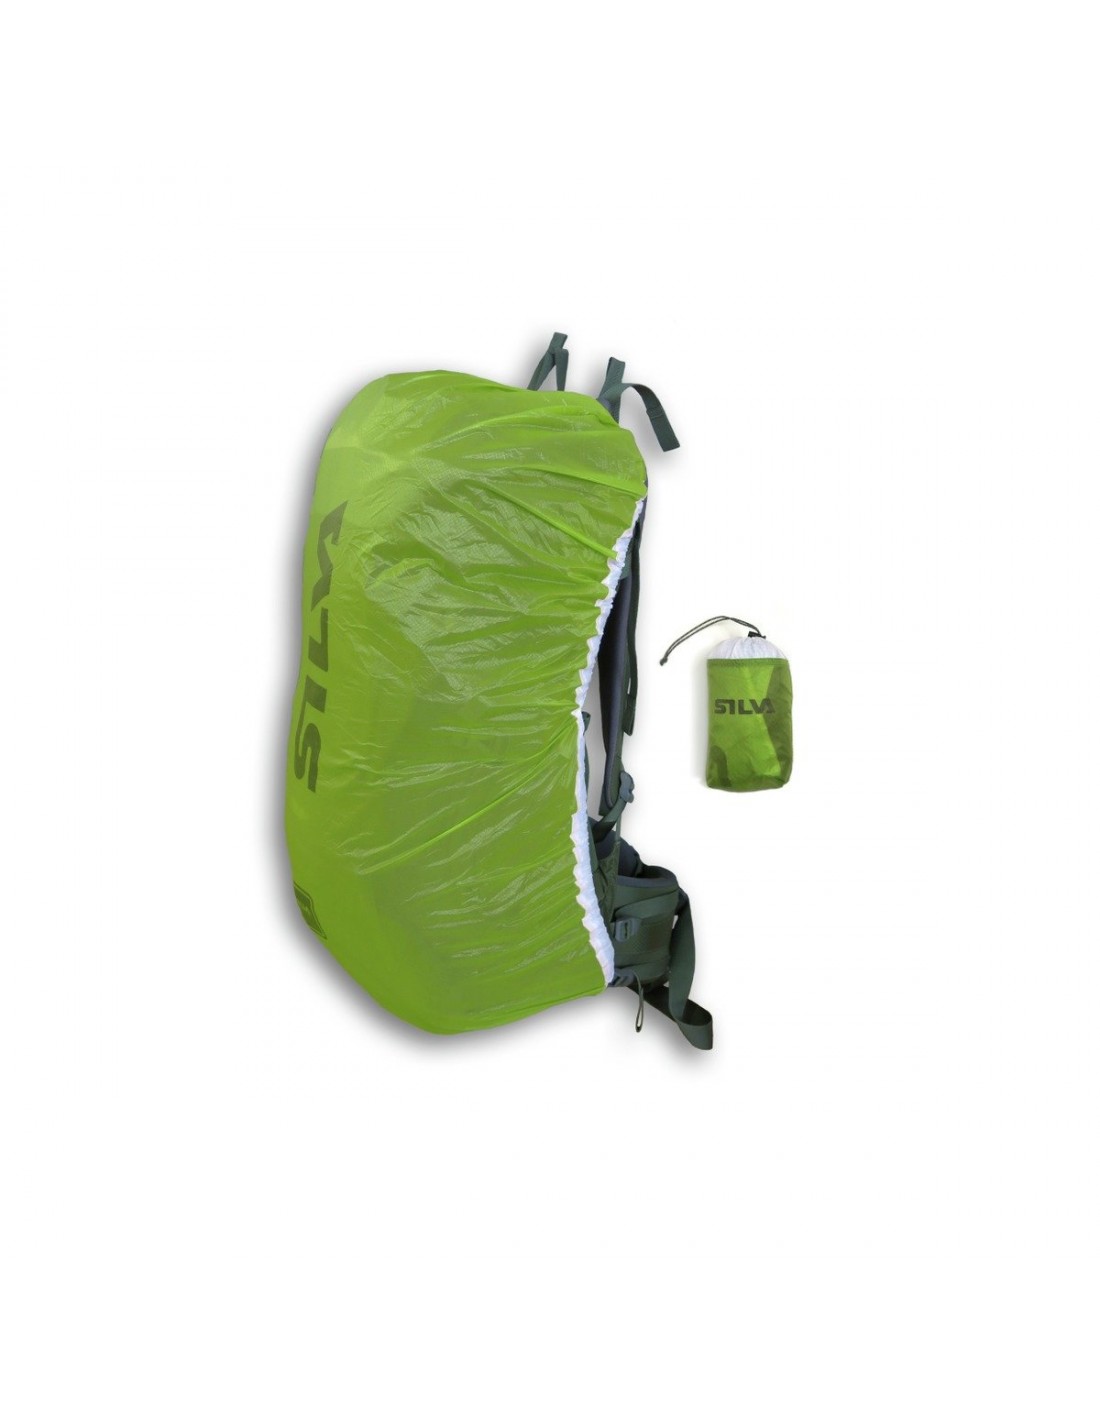 Carry dry rain cover L